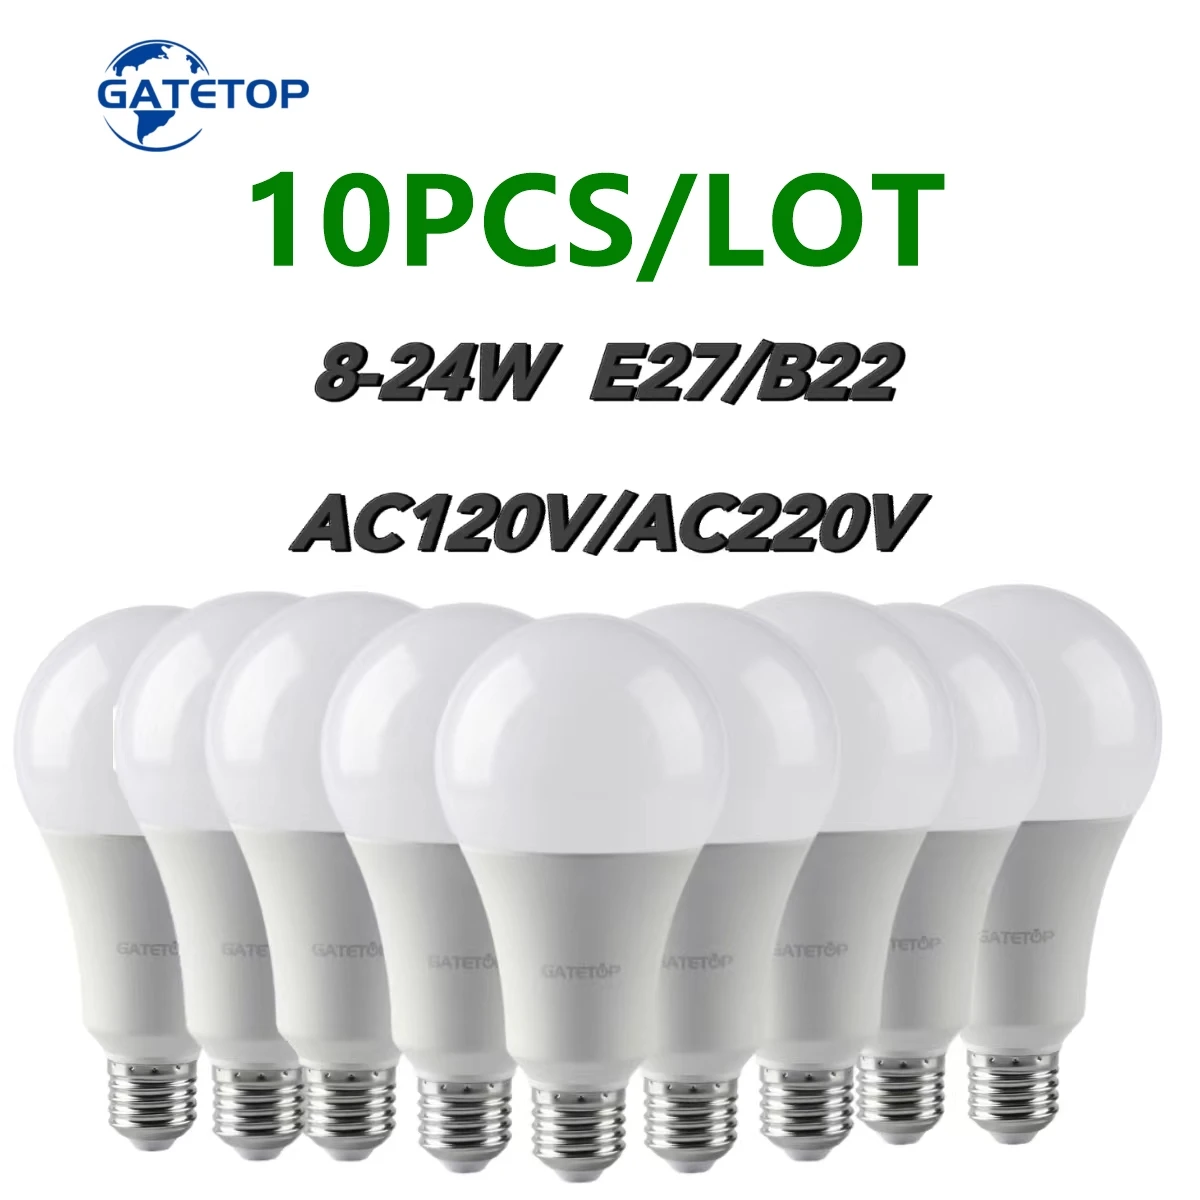 

10PCS Led Bulb Lamps A60/A80 E27 B22 AC120V/AC220V Light Real Power 8W-24W 3000K/4000K/6000K Lamps For Home and Office Lighting